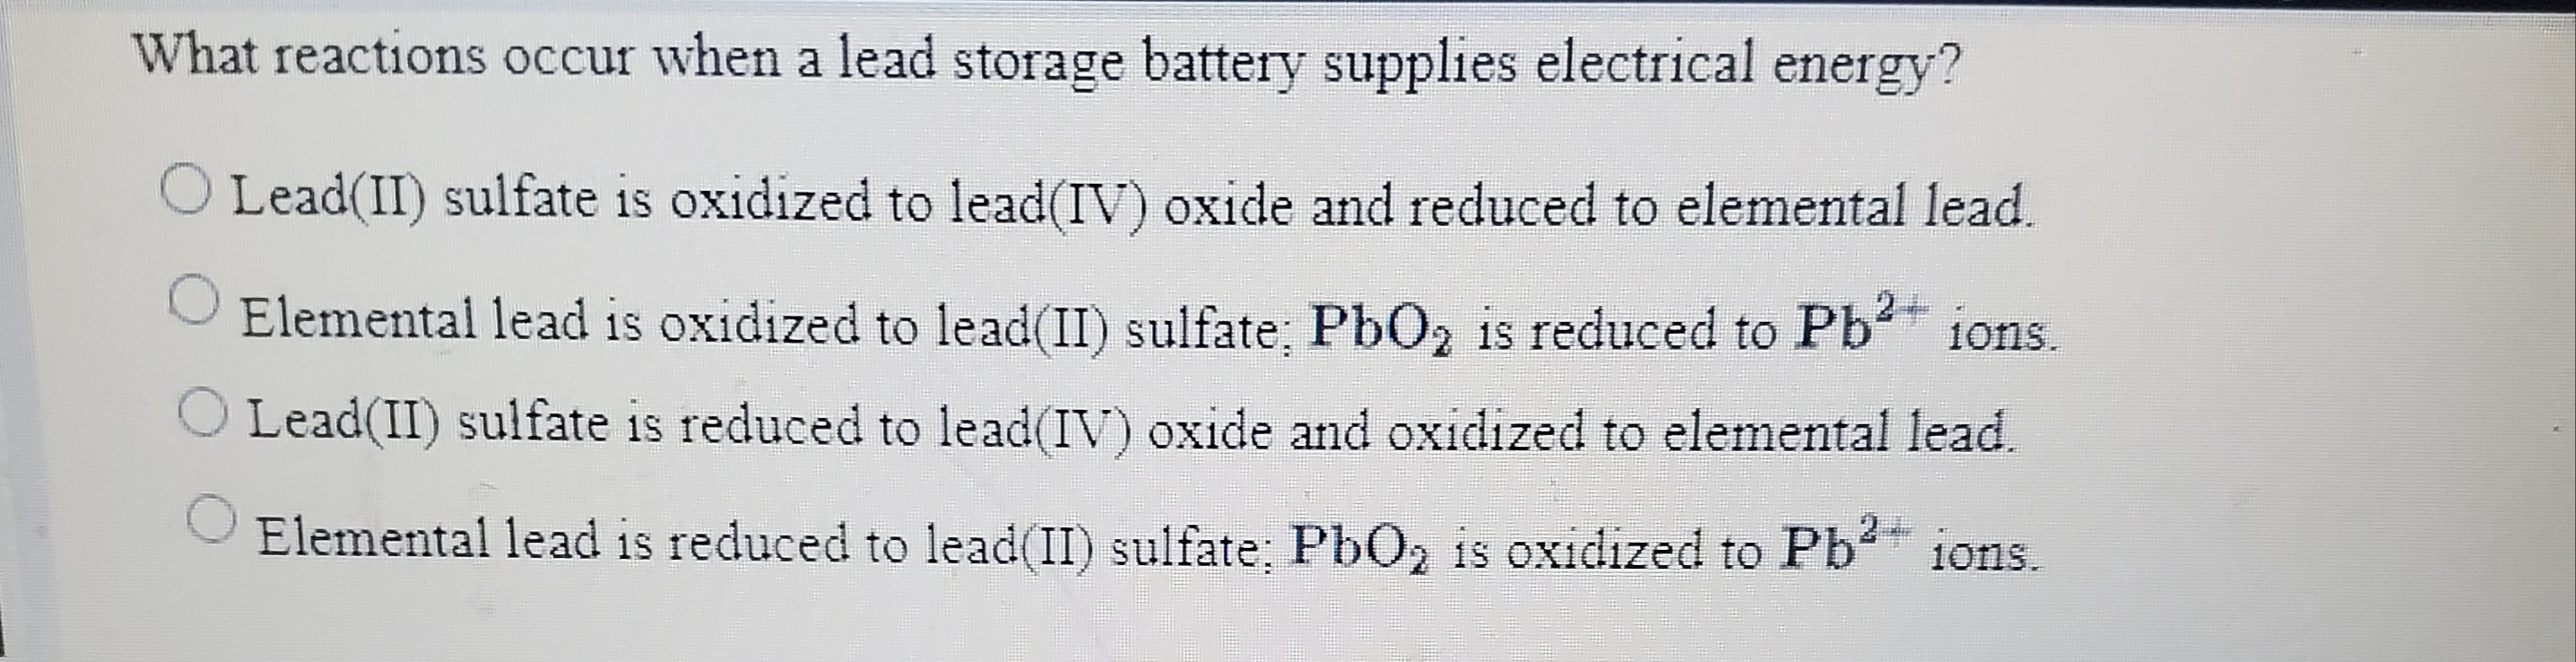 What reactions occur when a lead storage battery supplies electrical energy?
Lead(II) sulfate is oxidized to lead(IV) oxide and reduced to elemental lead.
Elemental lead is oxidized to lead(II) sulfate; PbO2 is reduced to Pb ions.
O Lead(II) sulfate is reduced to lead(IV) oxide and oxidized to elemental lead.
Elemental lead is reduced to lead(II) sulfate; PbO, is oxidized to Pb ions.
10ns.
